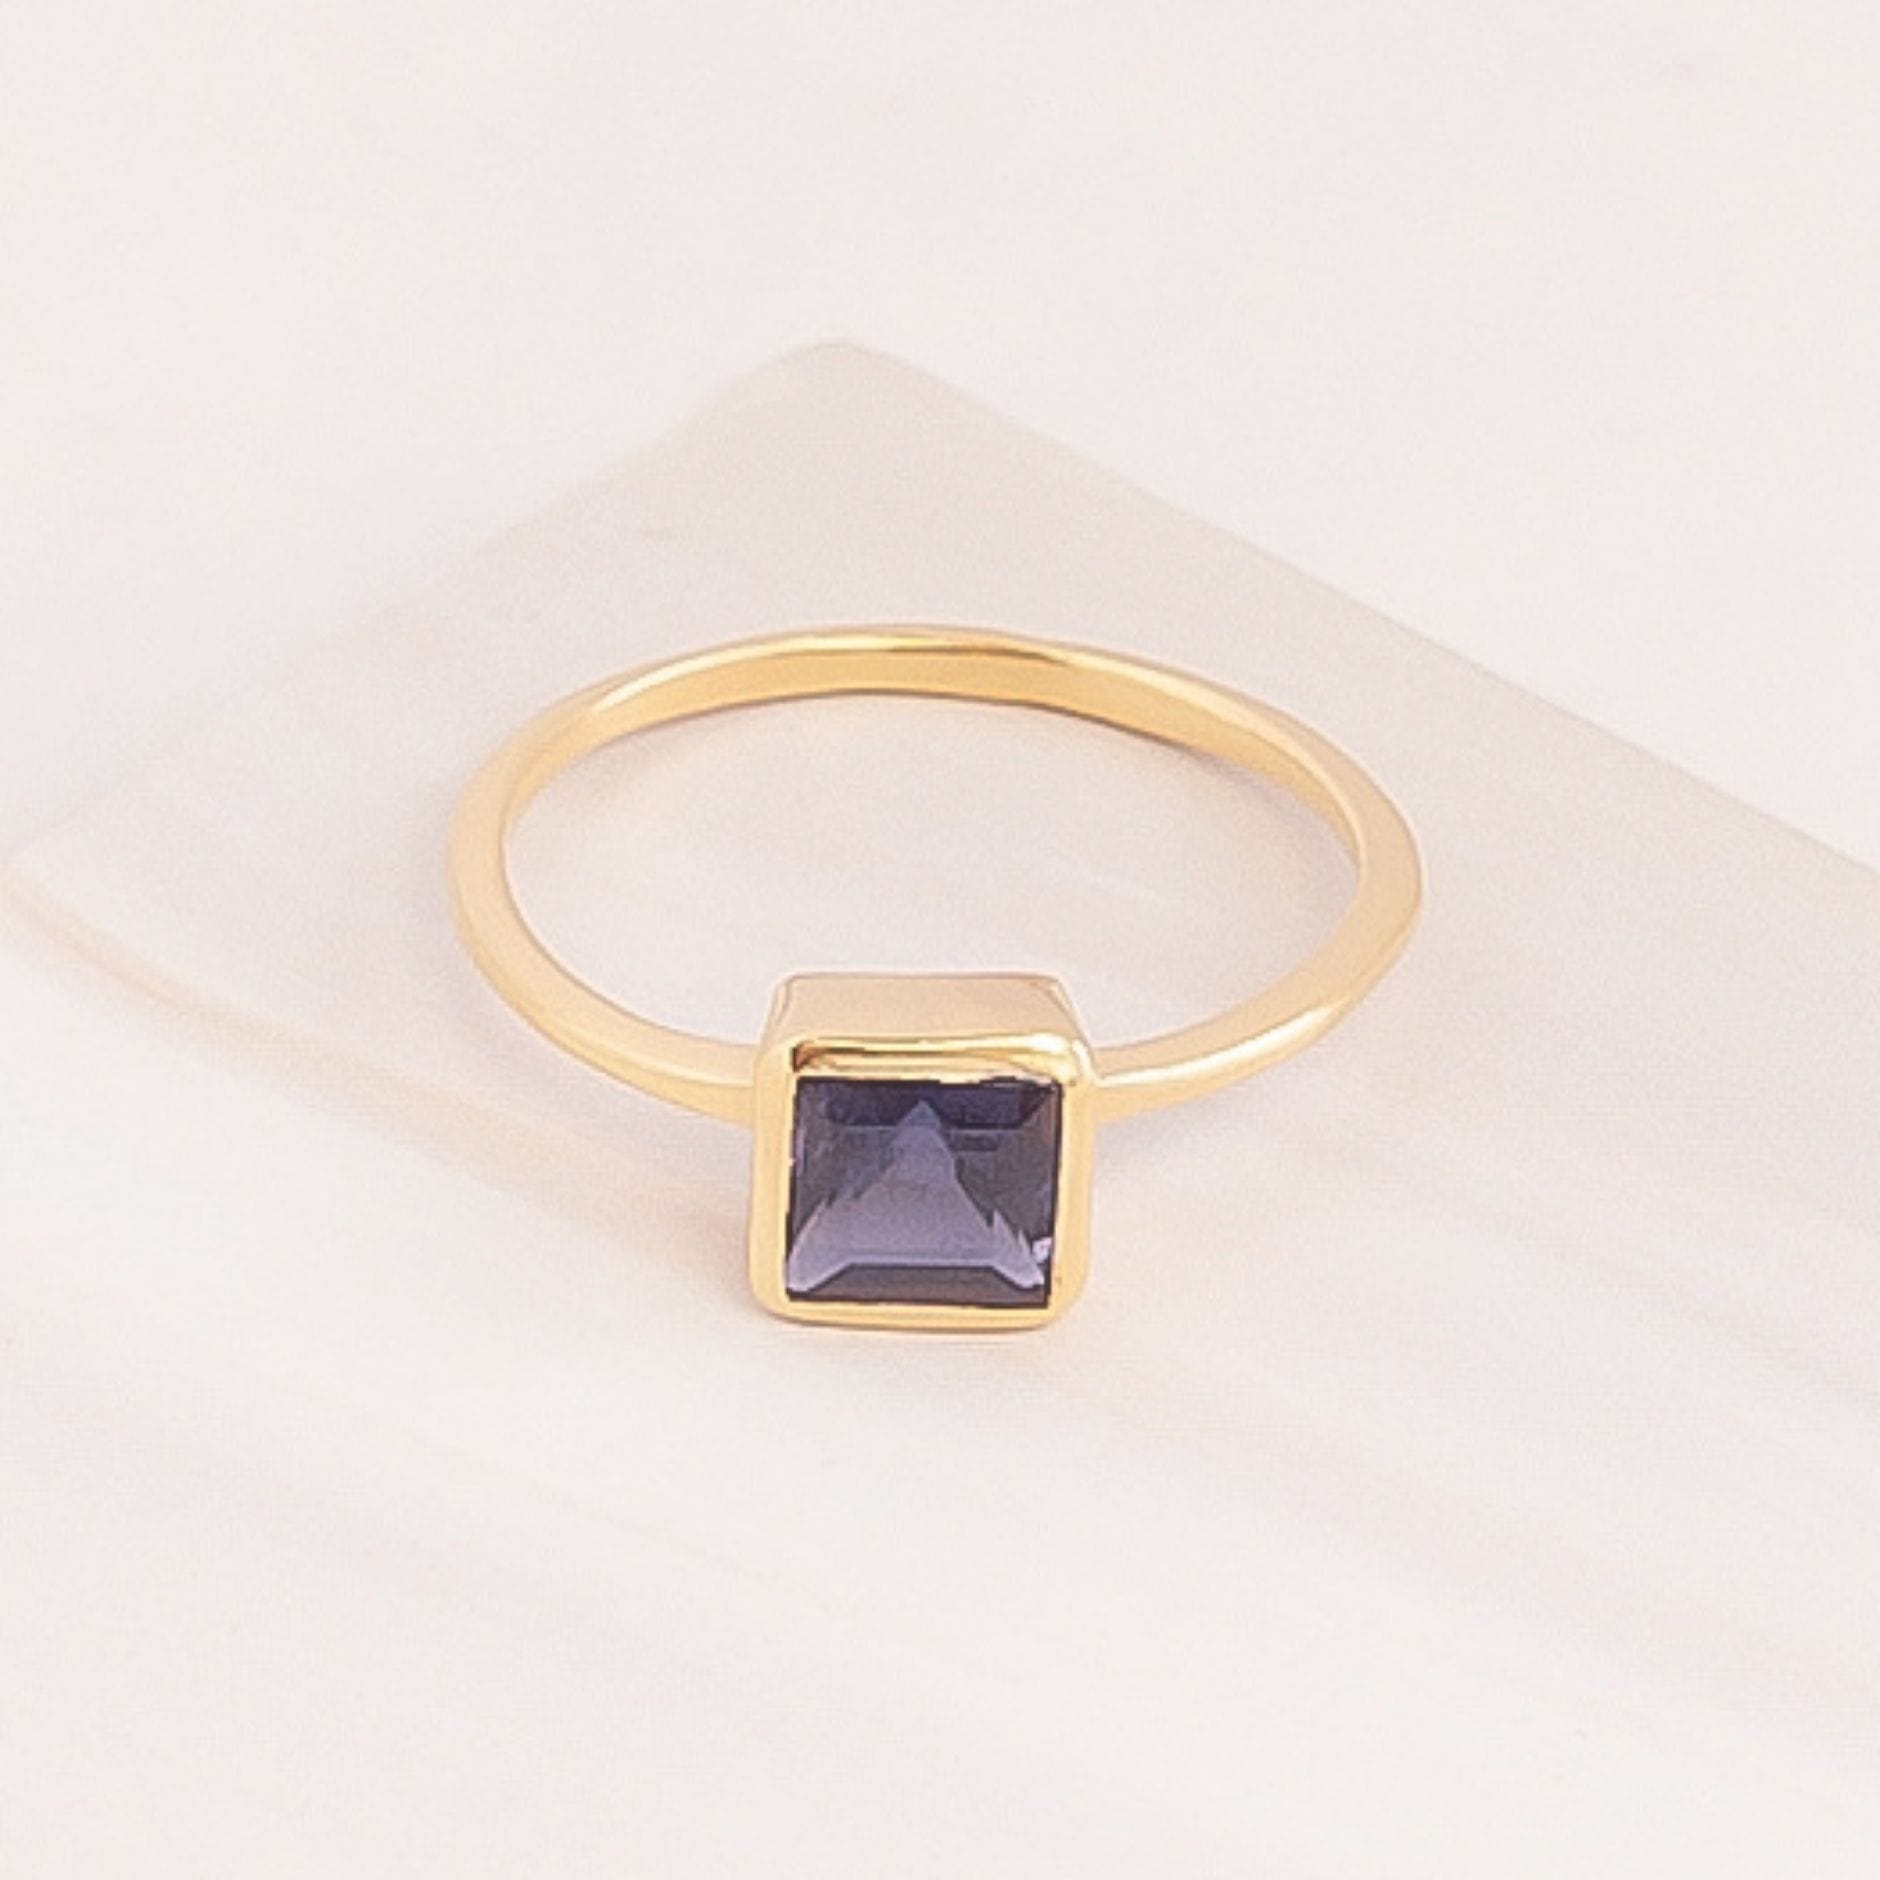 Emblem Jewelry Rings Blue Iolite / Square Signature Candy Gemstone Stack Rings (Ring Size 7)